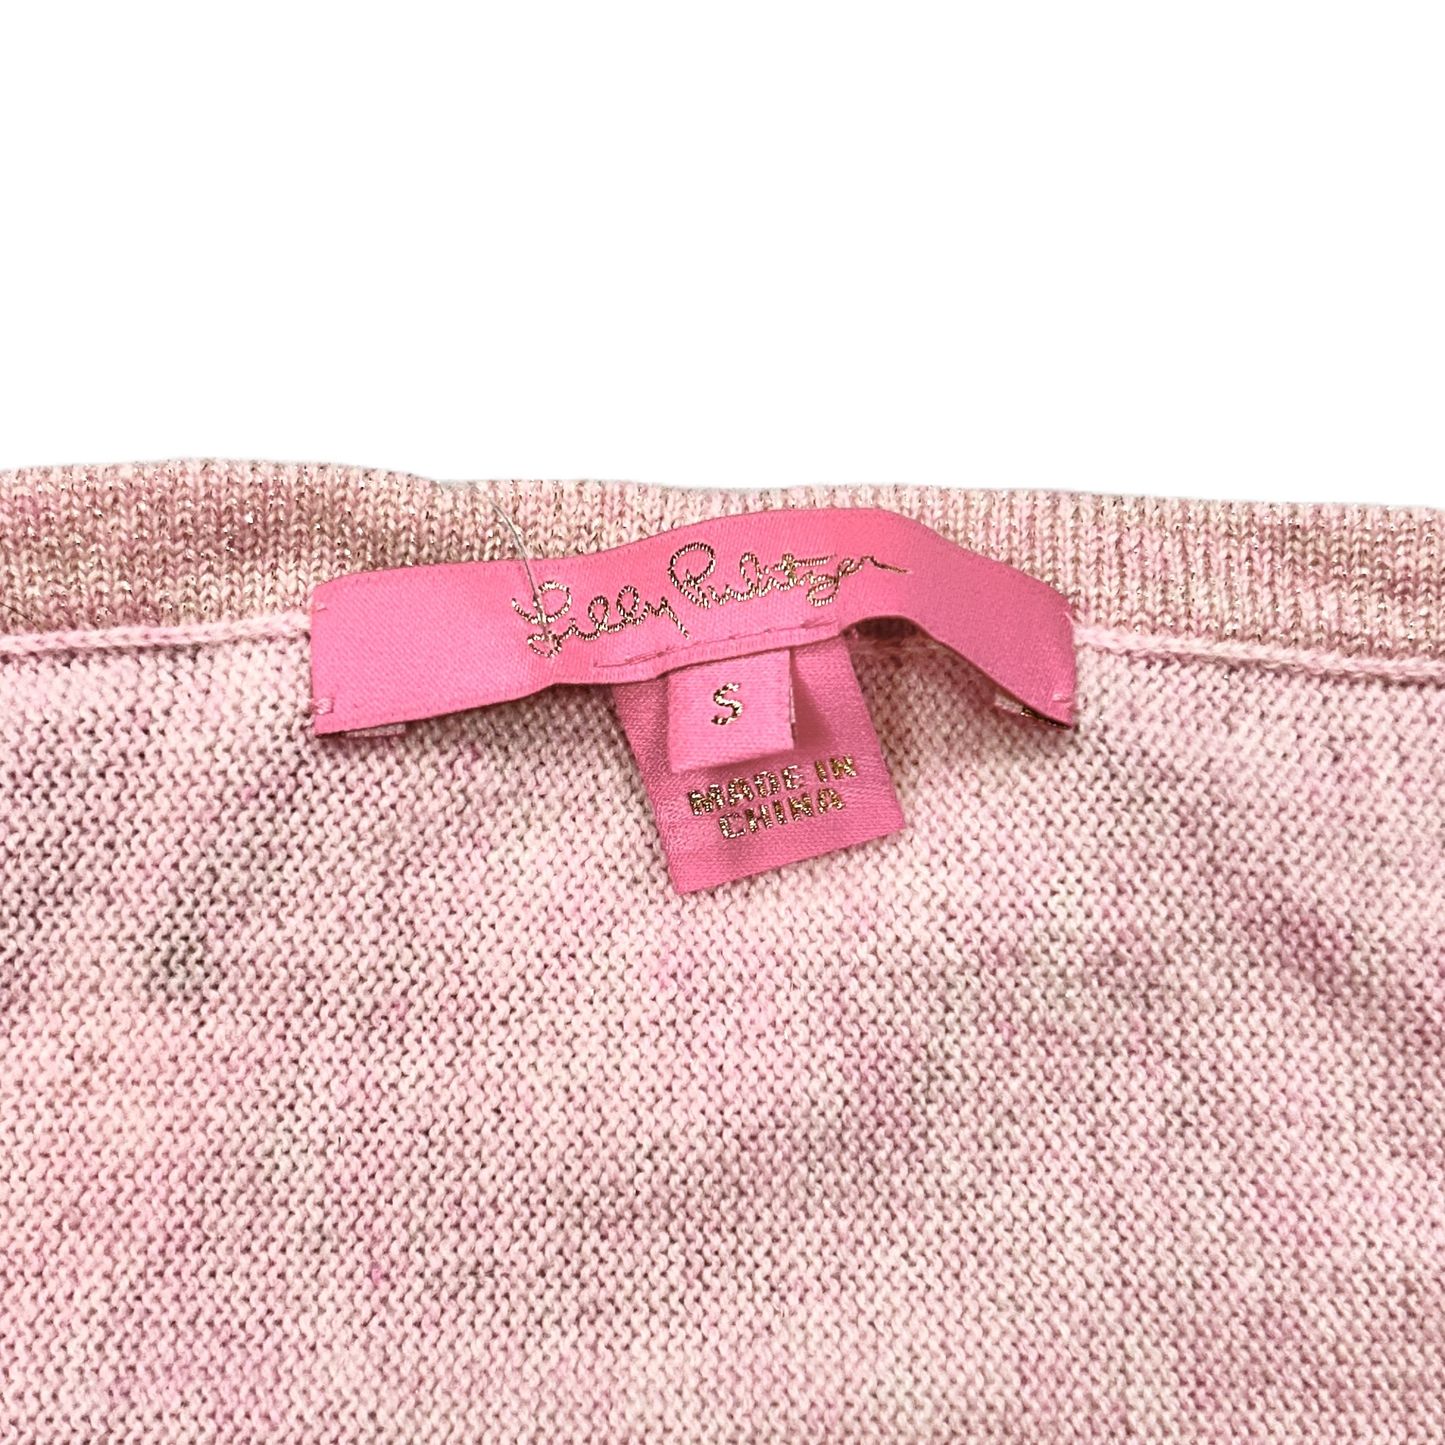 Pink Sweater Designer By Lilly Pulitzer, Size: S